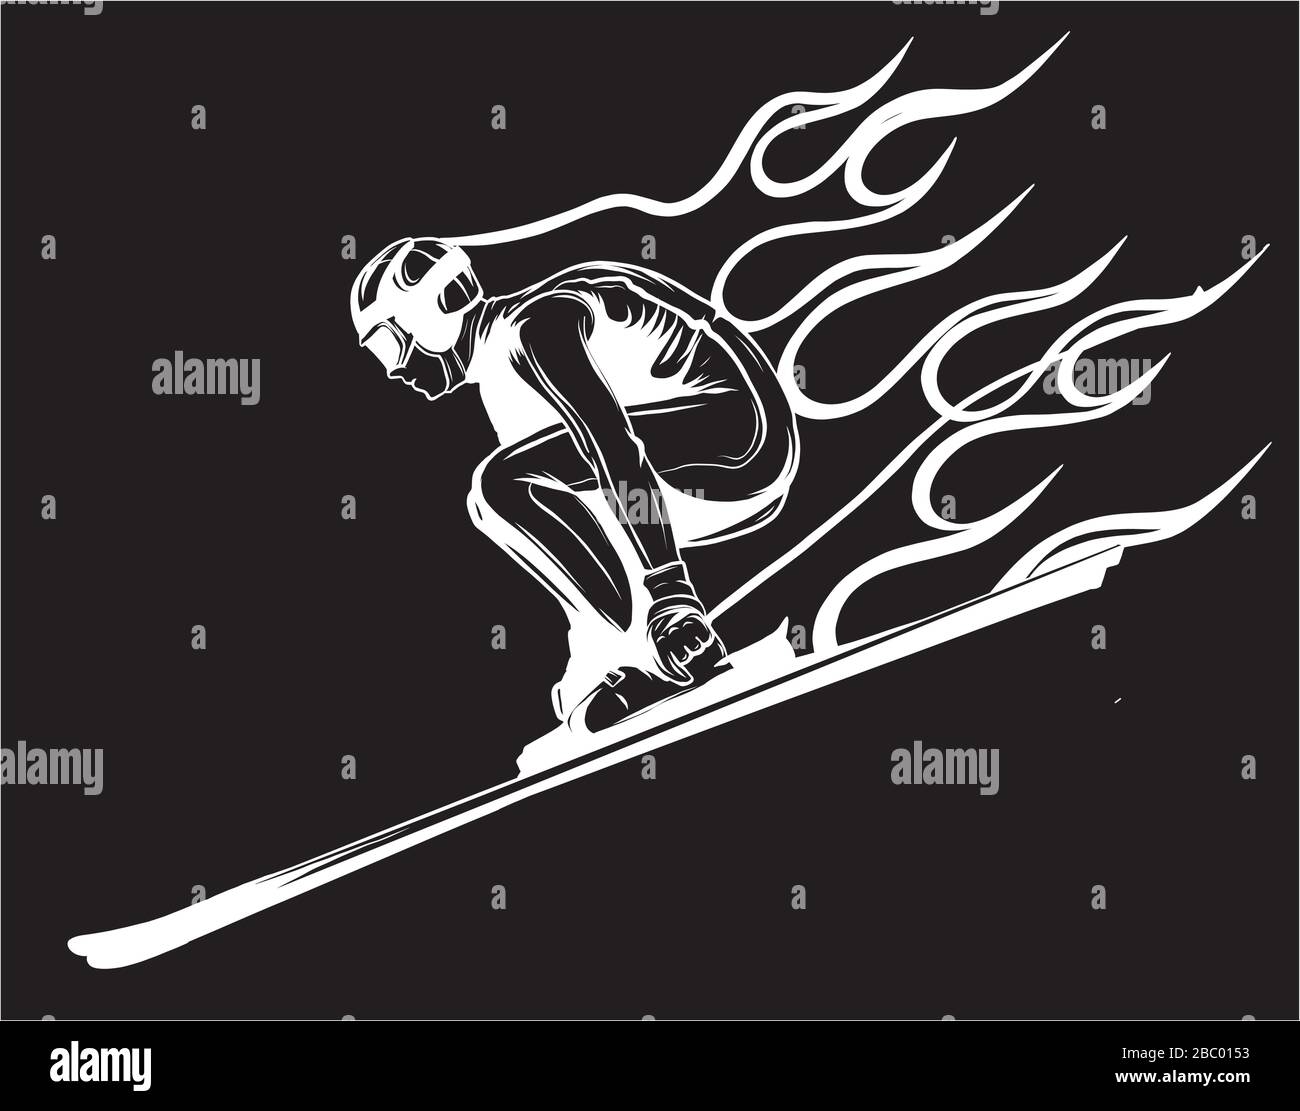 People skiing flat style in black background Stock Vector